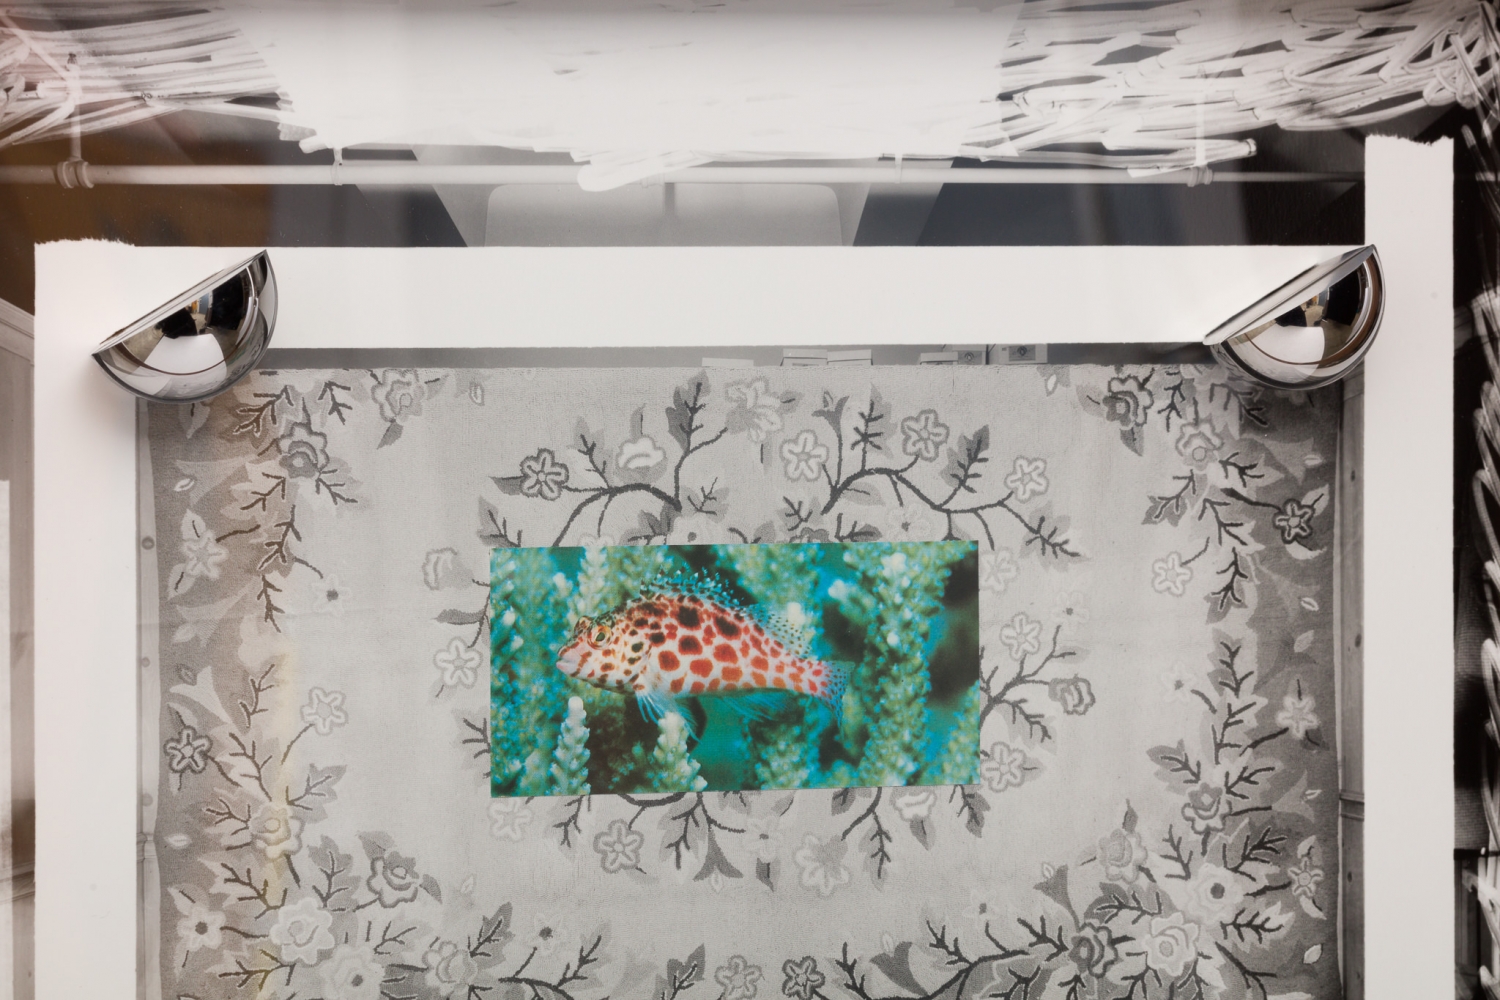 Elad Lassry

Untitled (Carpet, Coral Hawkfish)

2019

Silver gelatin print, offset print on paper, stainless steel, walnut frame

11 1/4 x 14 1/4 x 2 inches (28.6 x 36.2 x 5.1 cm) framed

Unique

EL 494

$18,000

&amp;nbsp;

INQUIRE